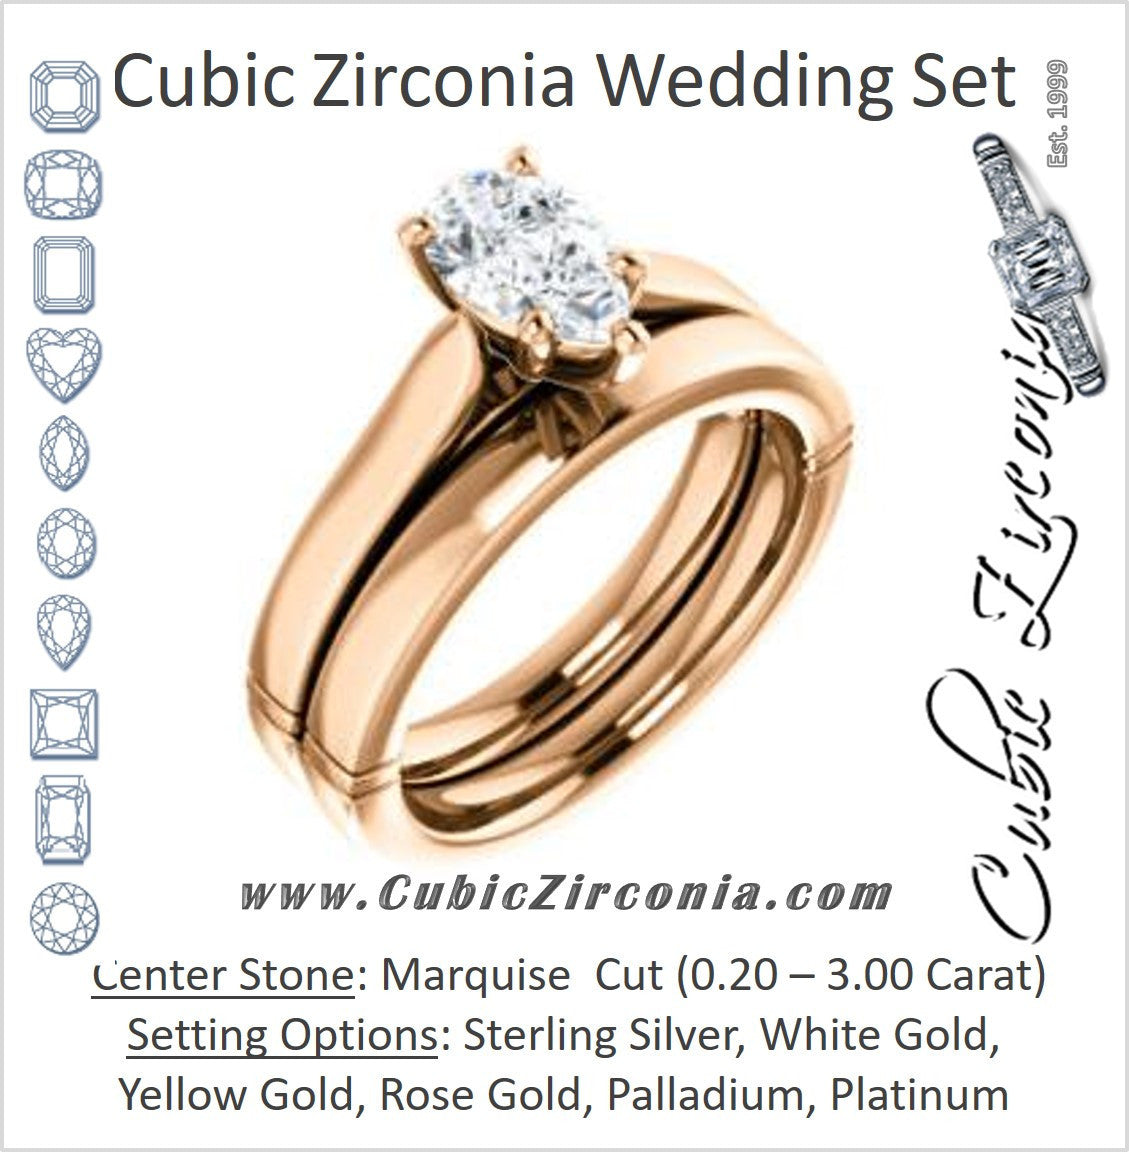 CZ Wedding Set, featuring The Kaela engagement ring (Customizable Pear Cut Solitaire with Stackable Band)